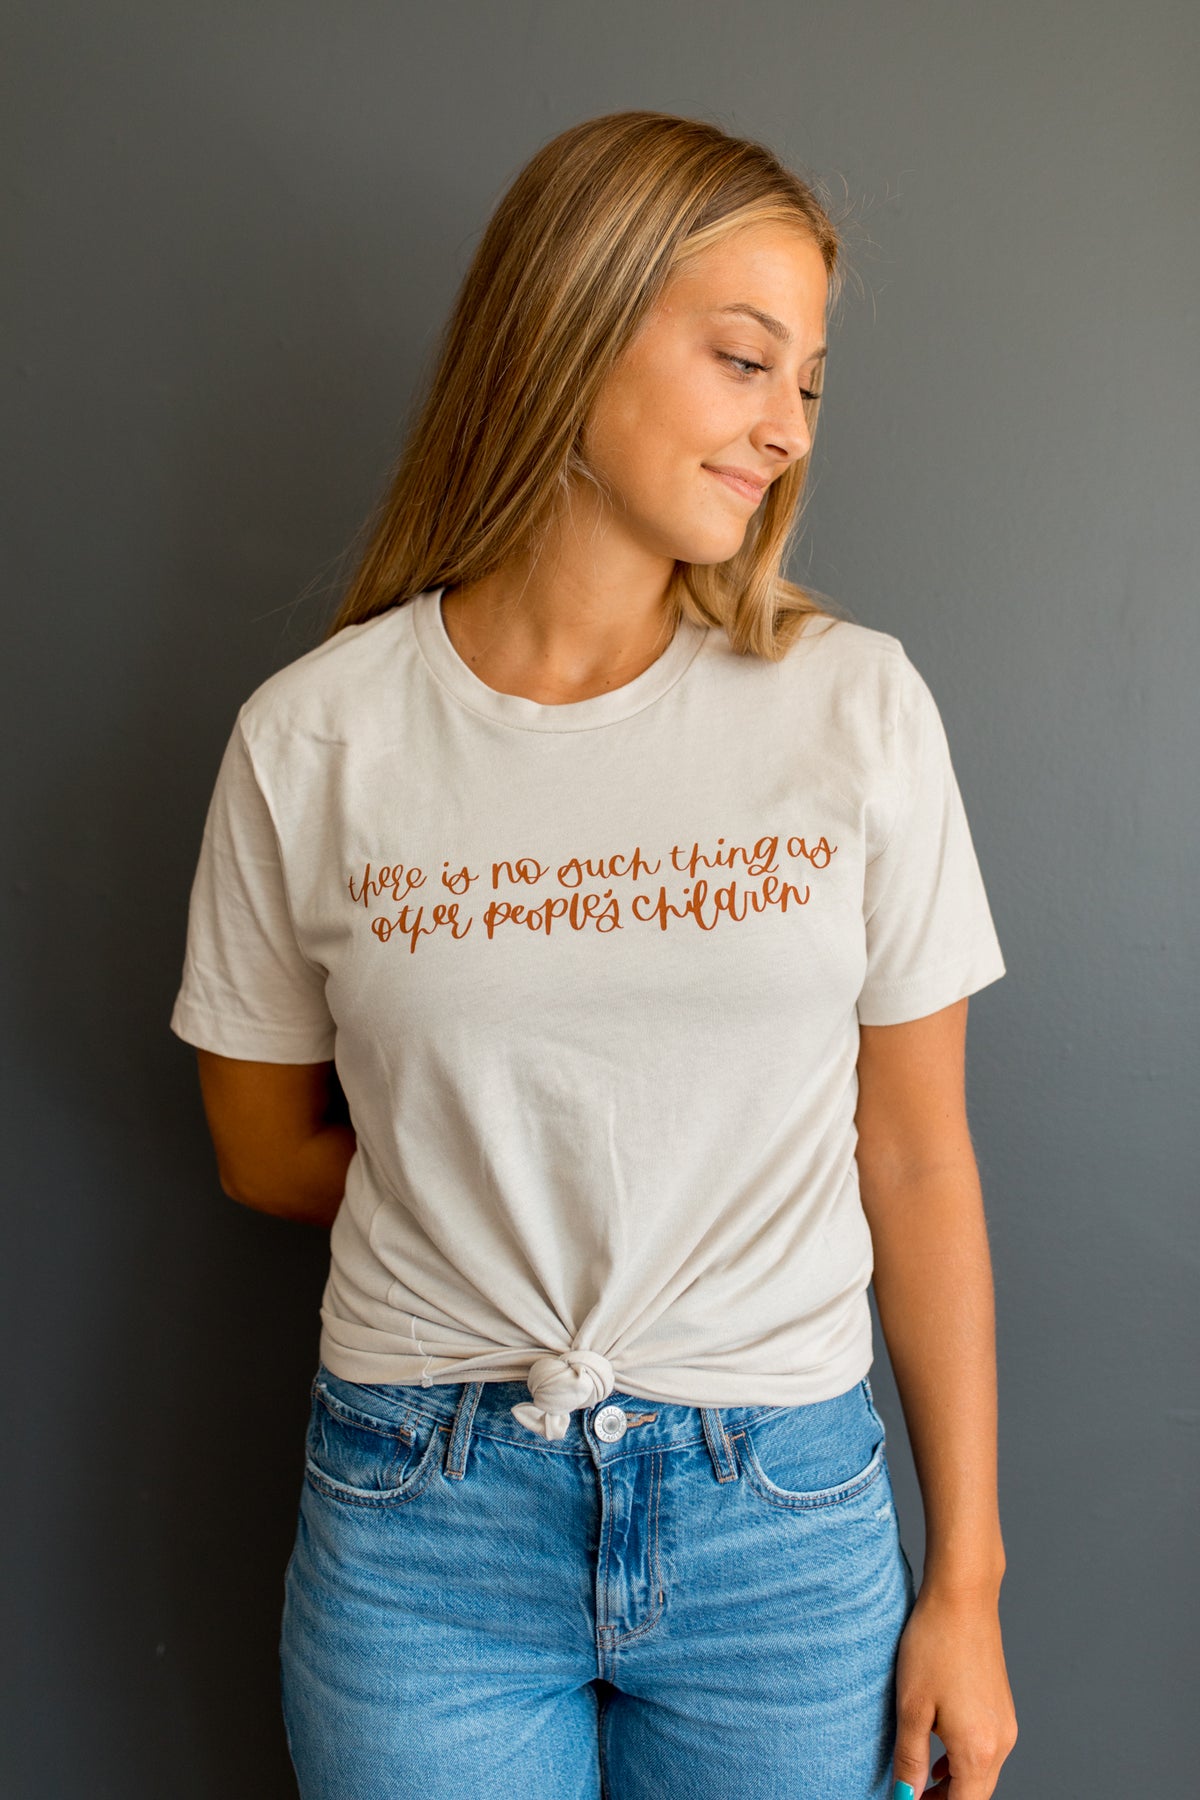 OTHER PEOPLE'S CHILDREN T-SHIRT